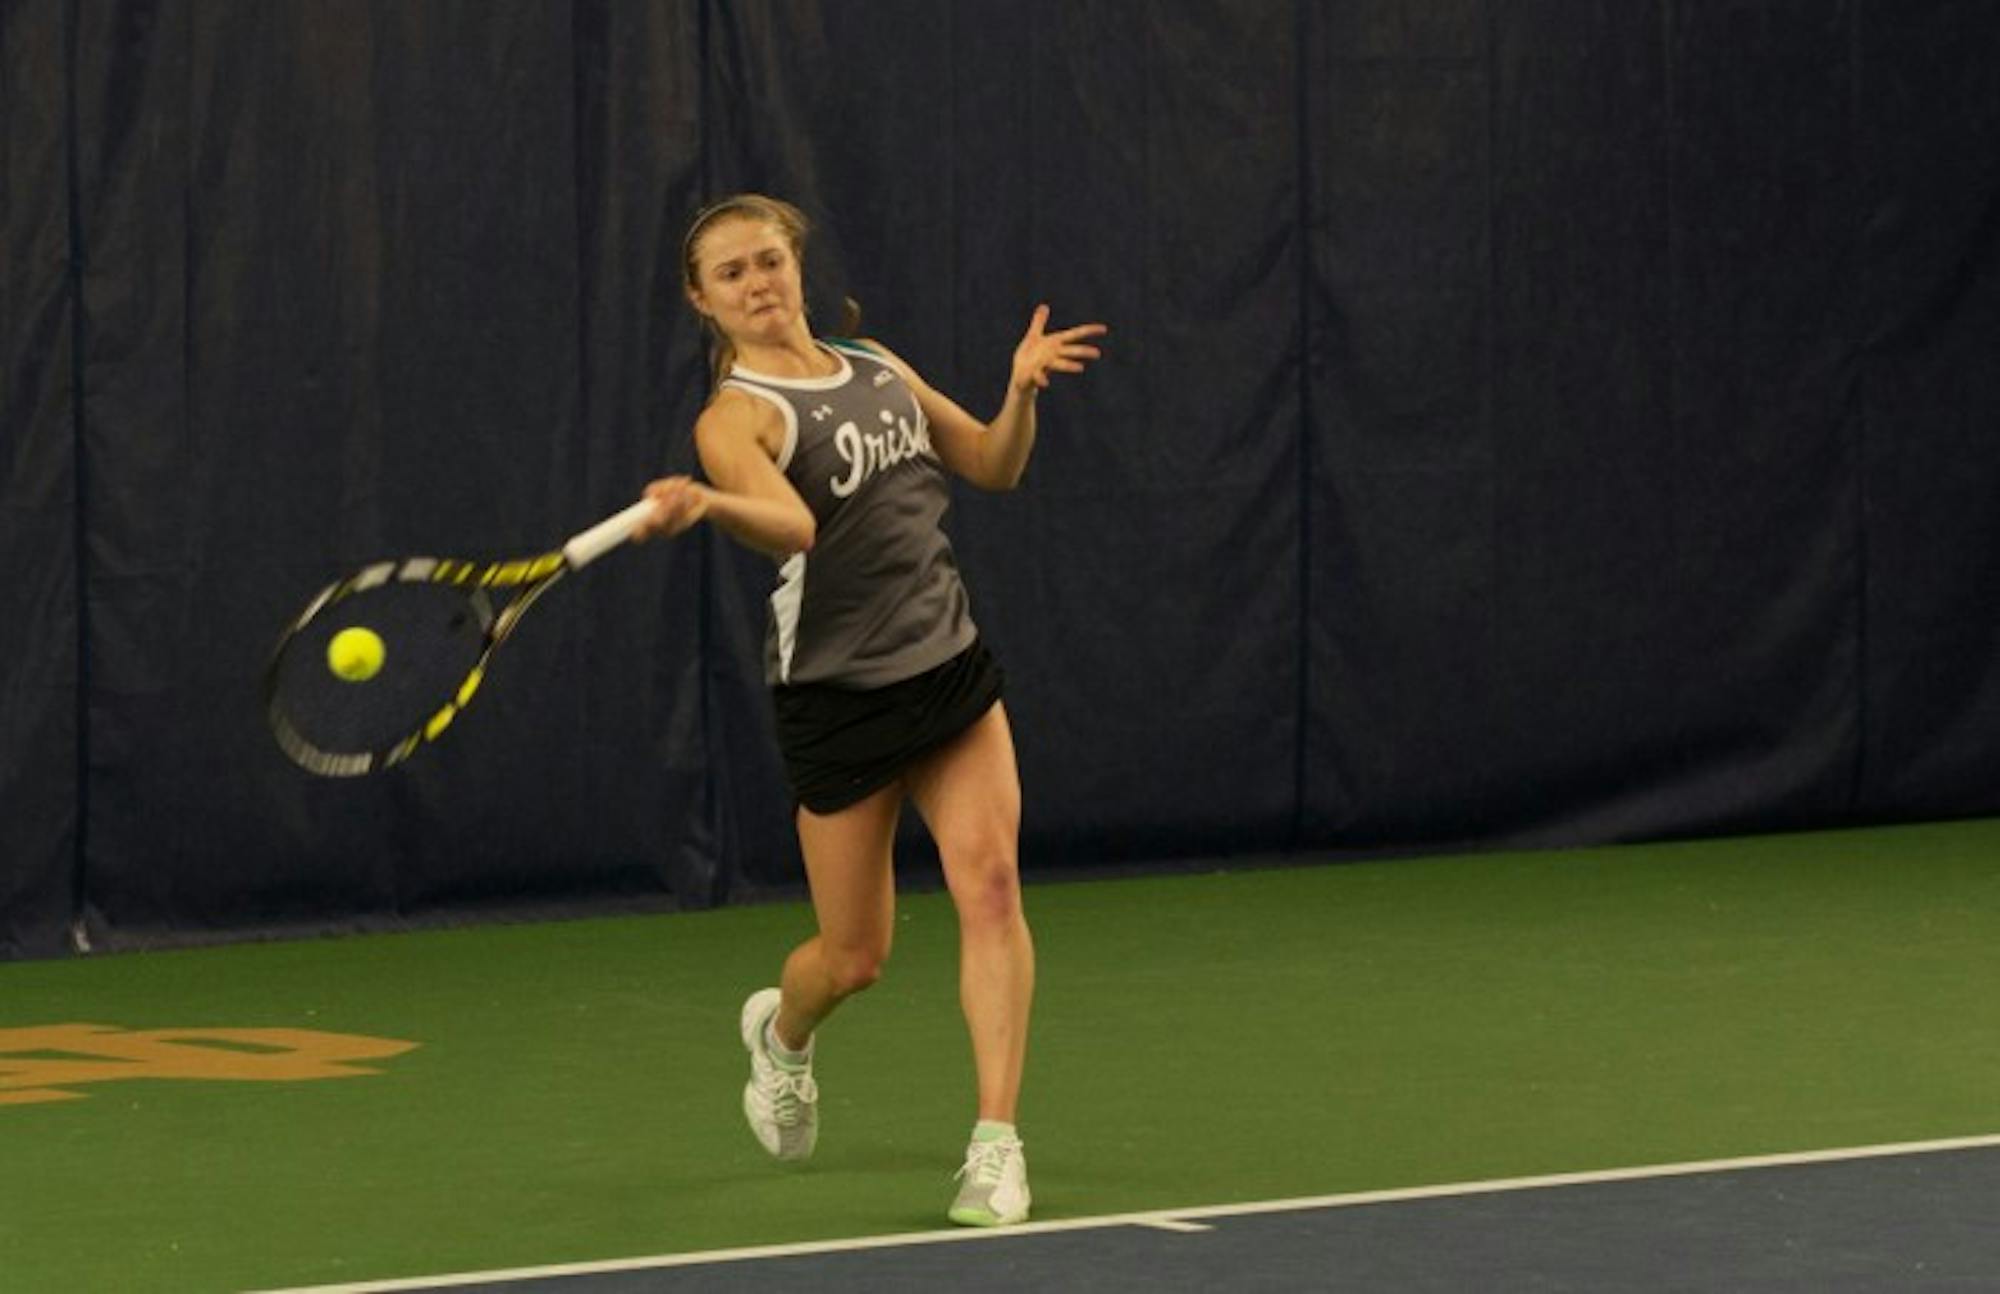 Irish senior Monica Robinson hits a forehand during Notre Dame’s 6-1 win over Indiana on Feb. 20 at Eck Tennis Pavilion.